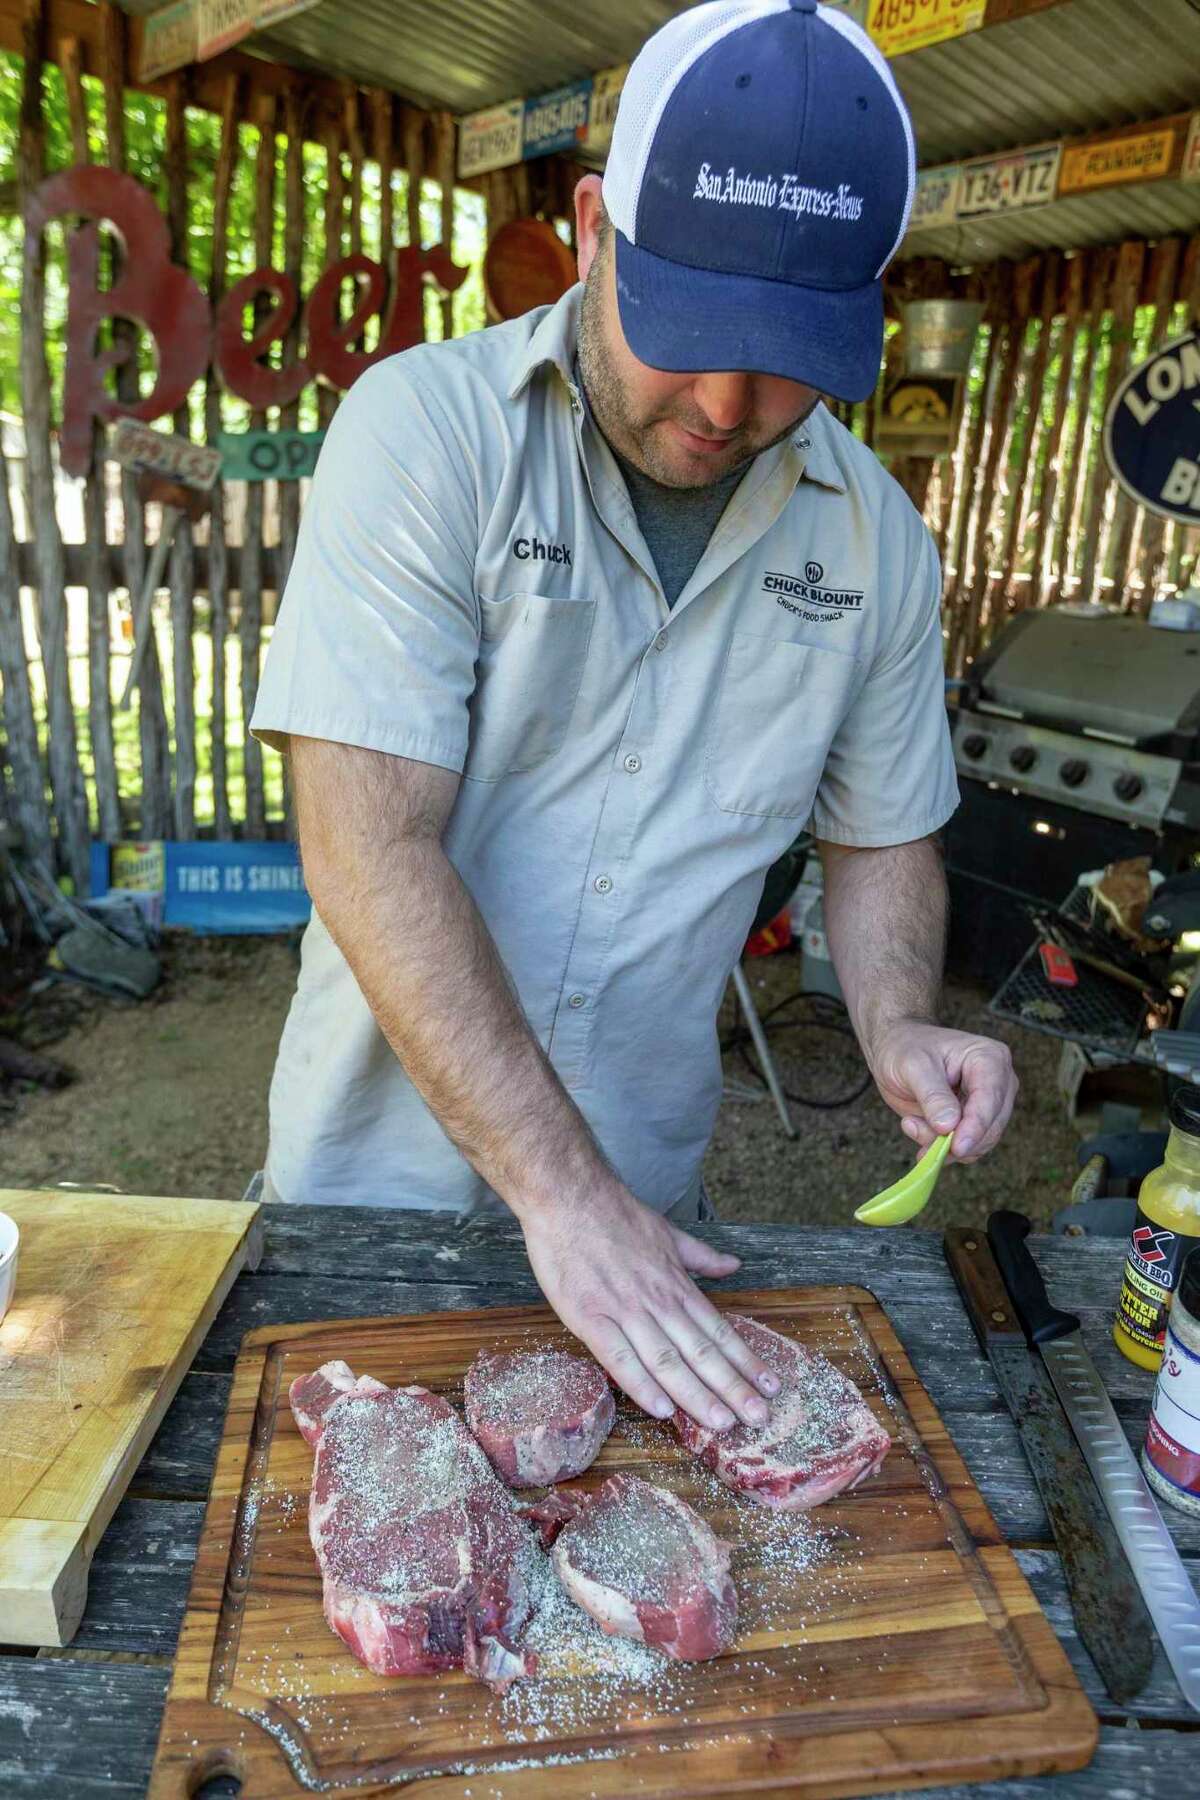 Chuck Blount seasons select, choice and prime steaks at his Food Shack with an equal mixture of salt and pepper.